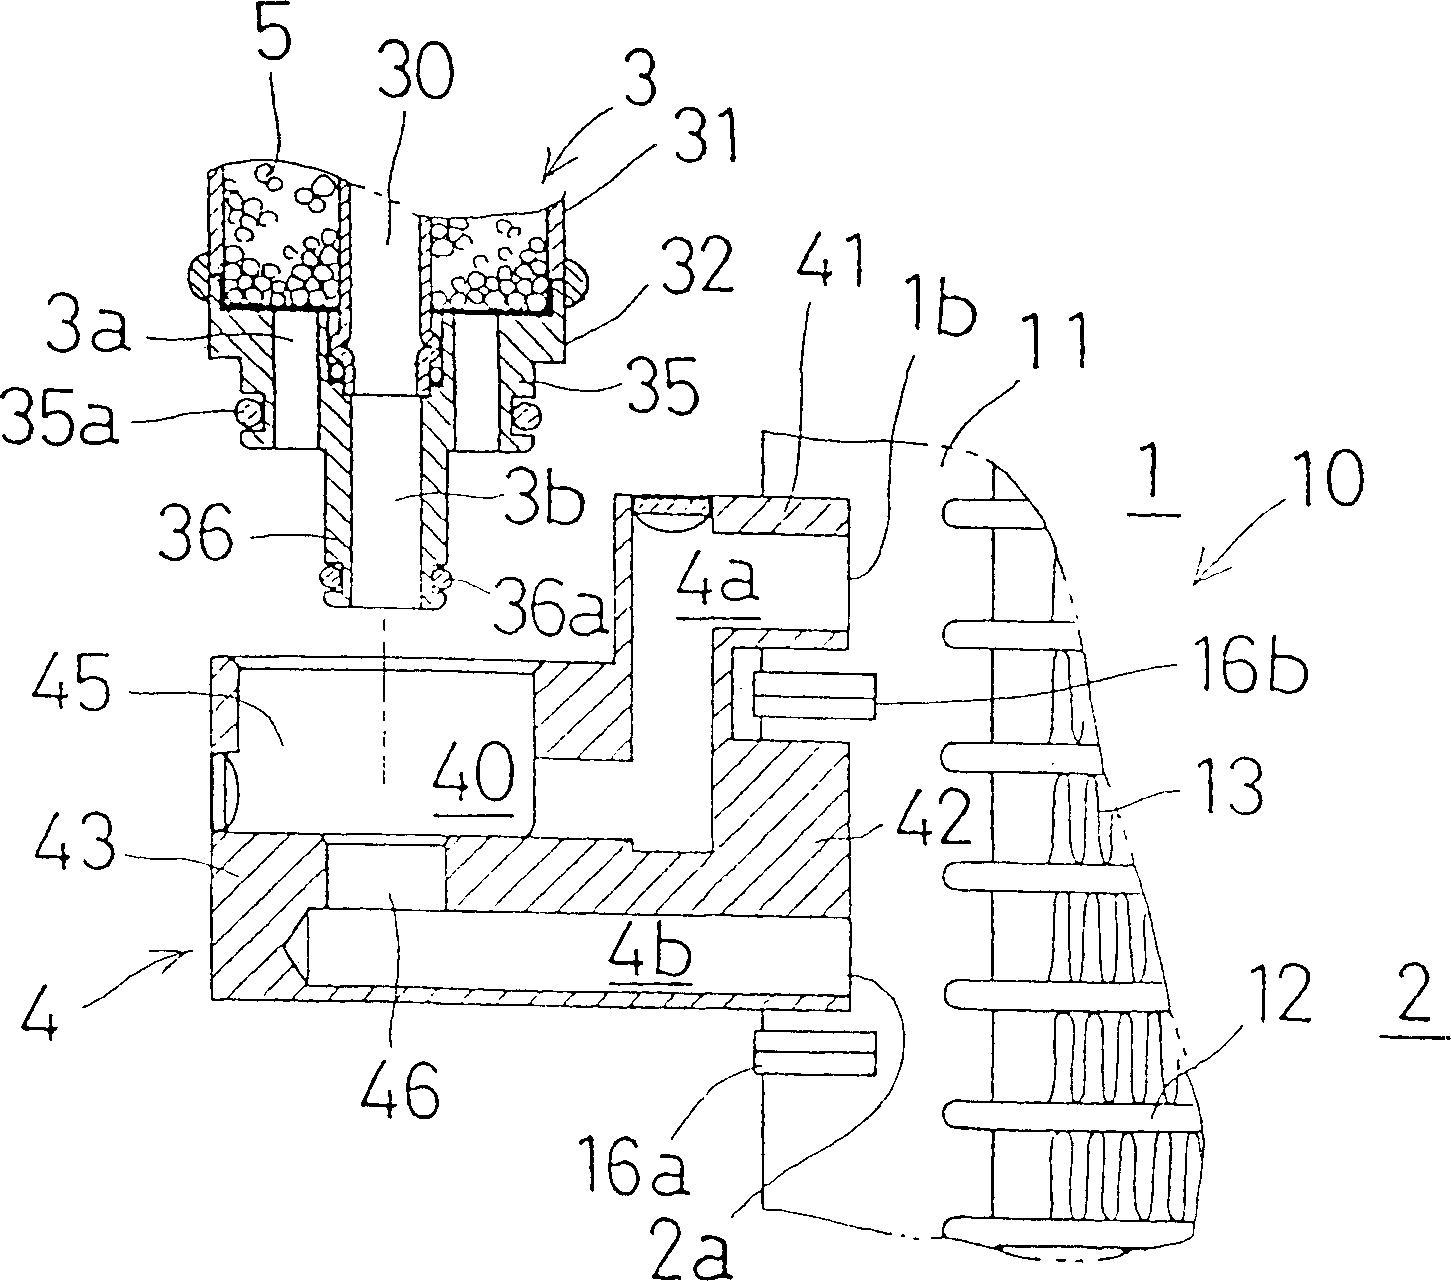 Heat excanger with receiver tank, and refrigeration system